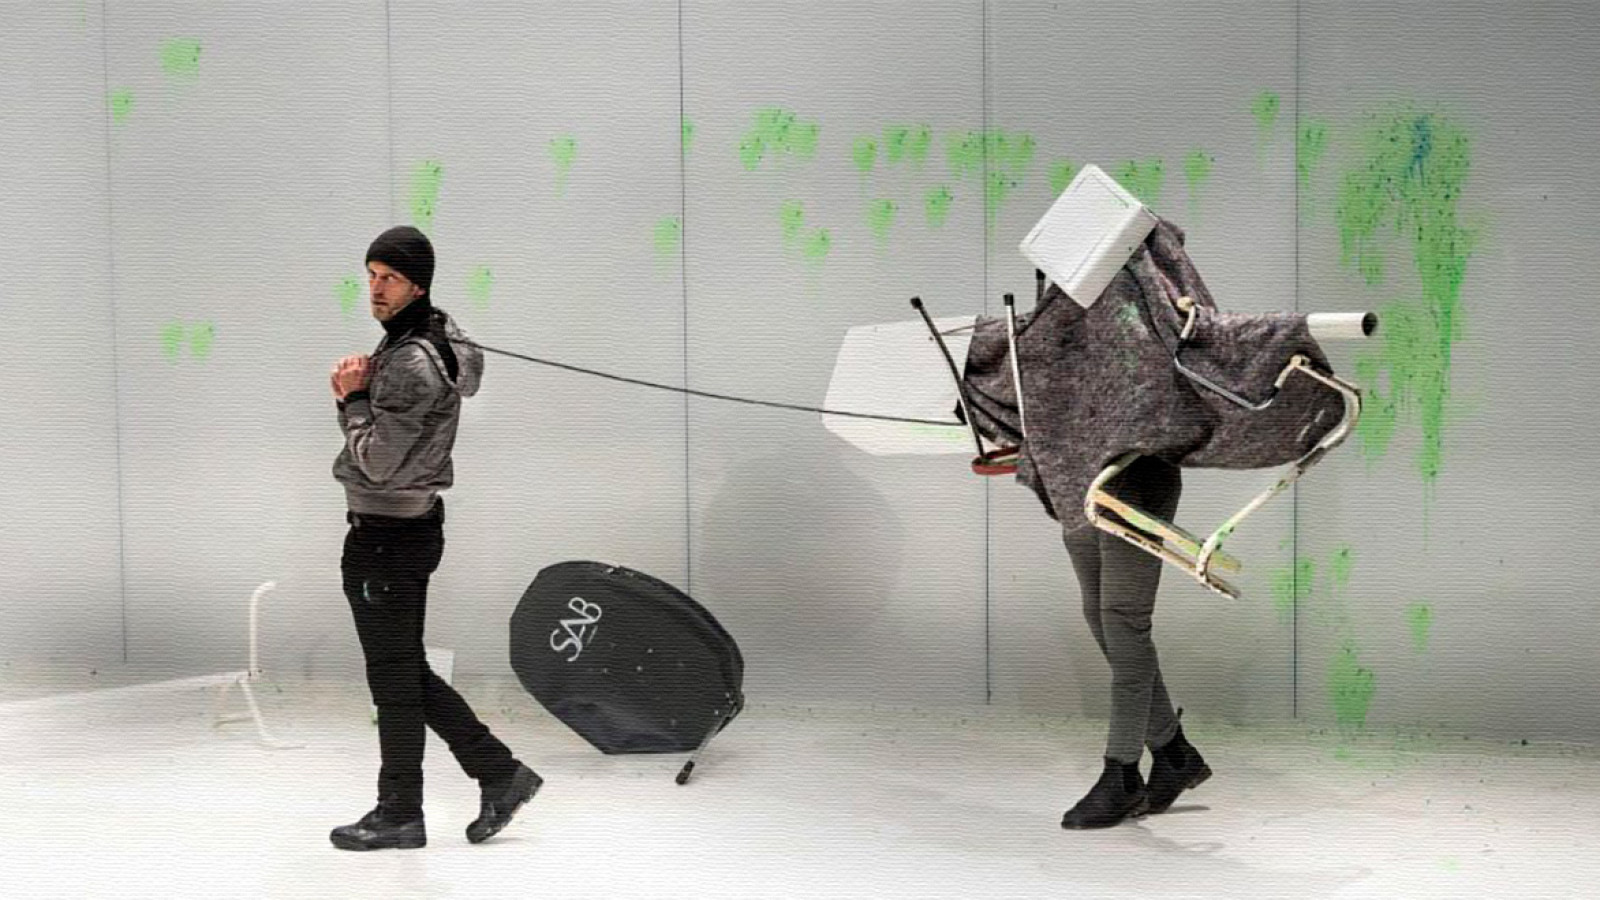 “The Automated Sniper” installation and video game